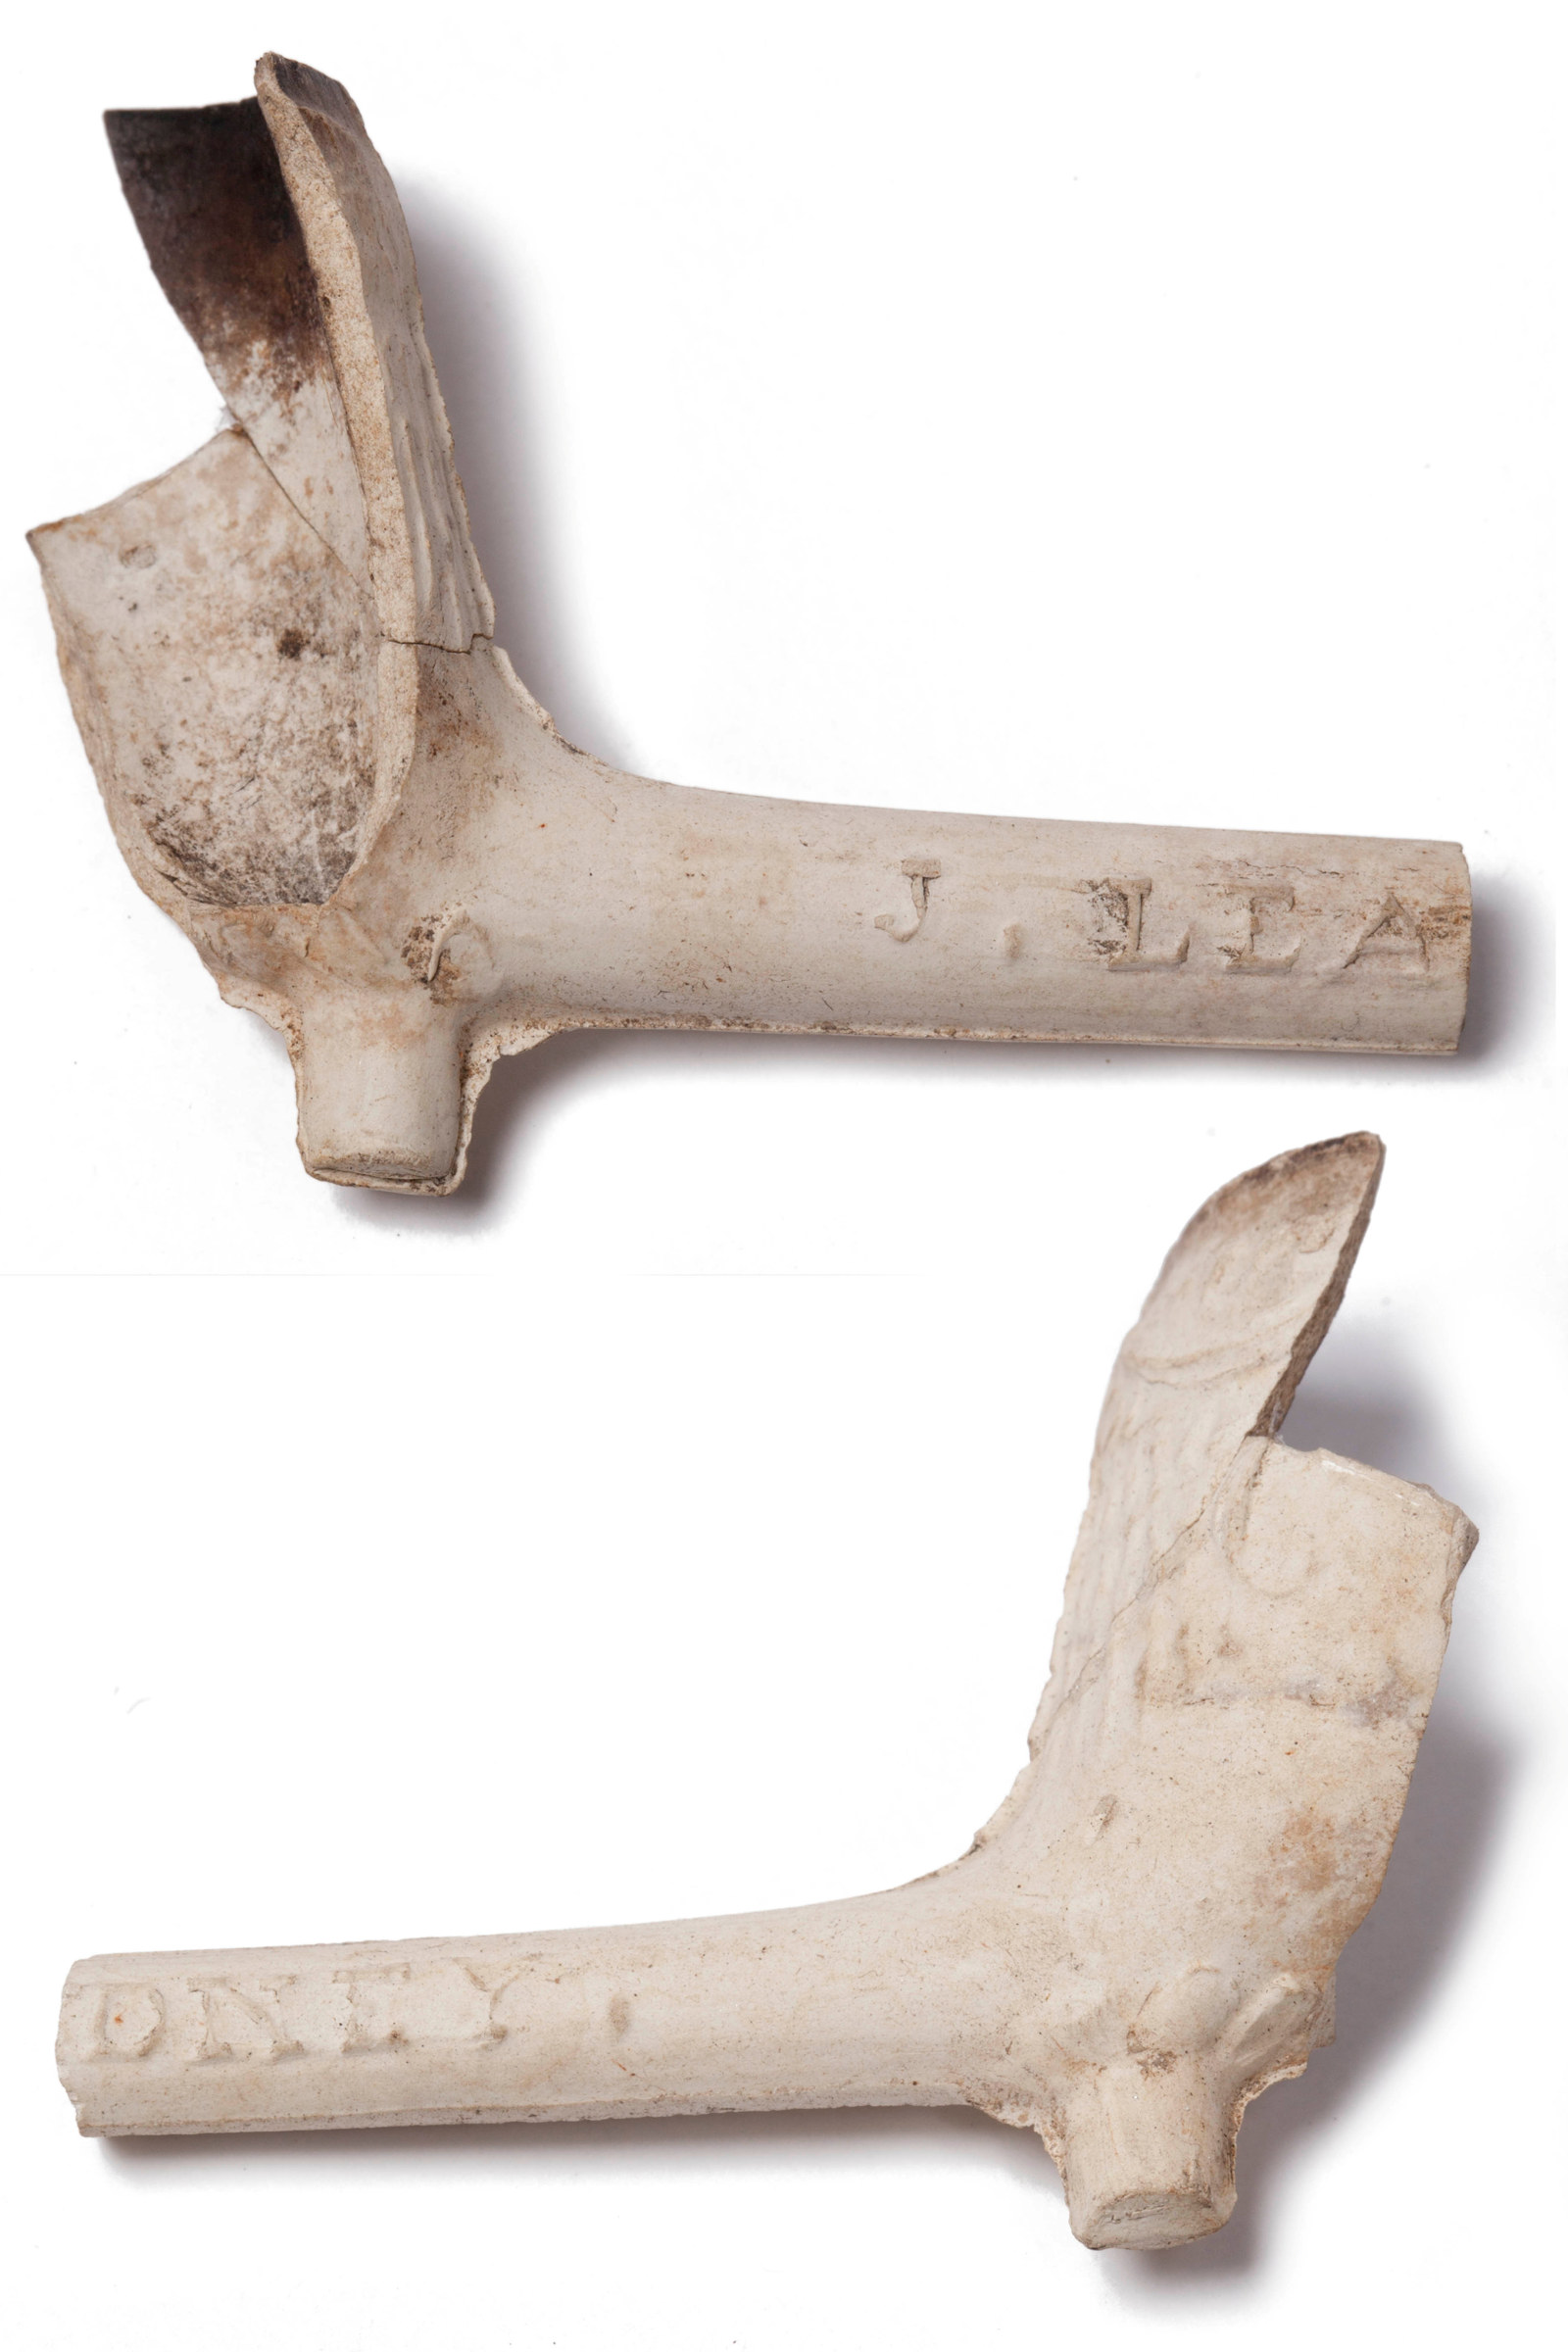 Composite image of a clay pipe with a broken bowl, viewed from both sides